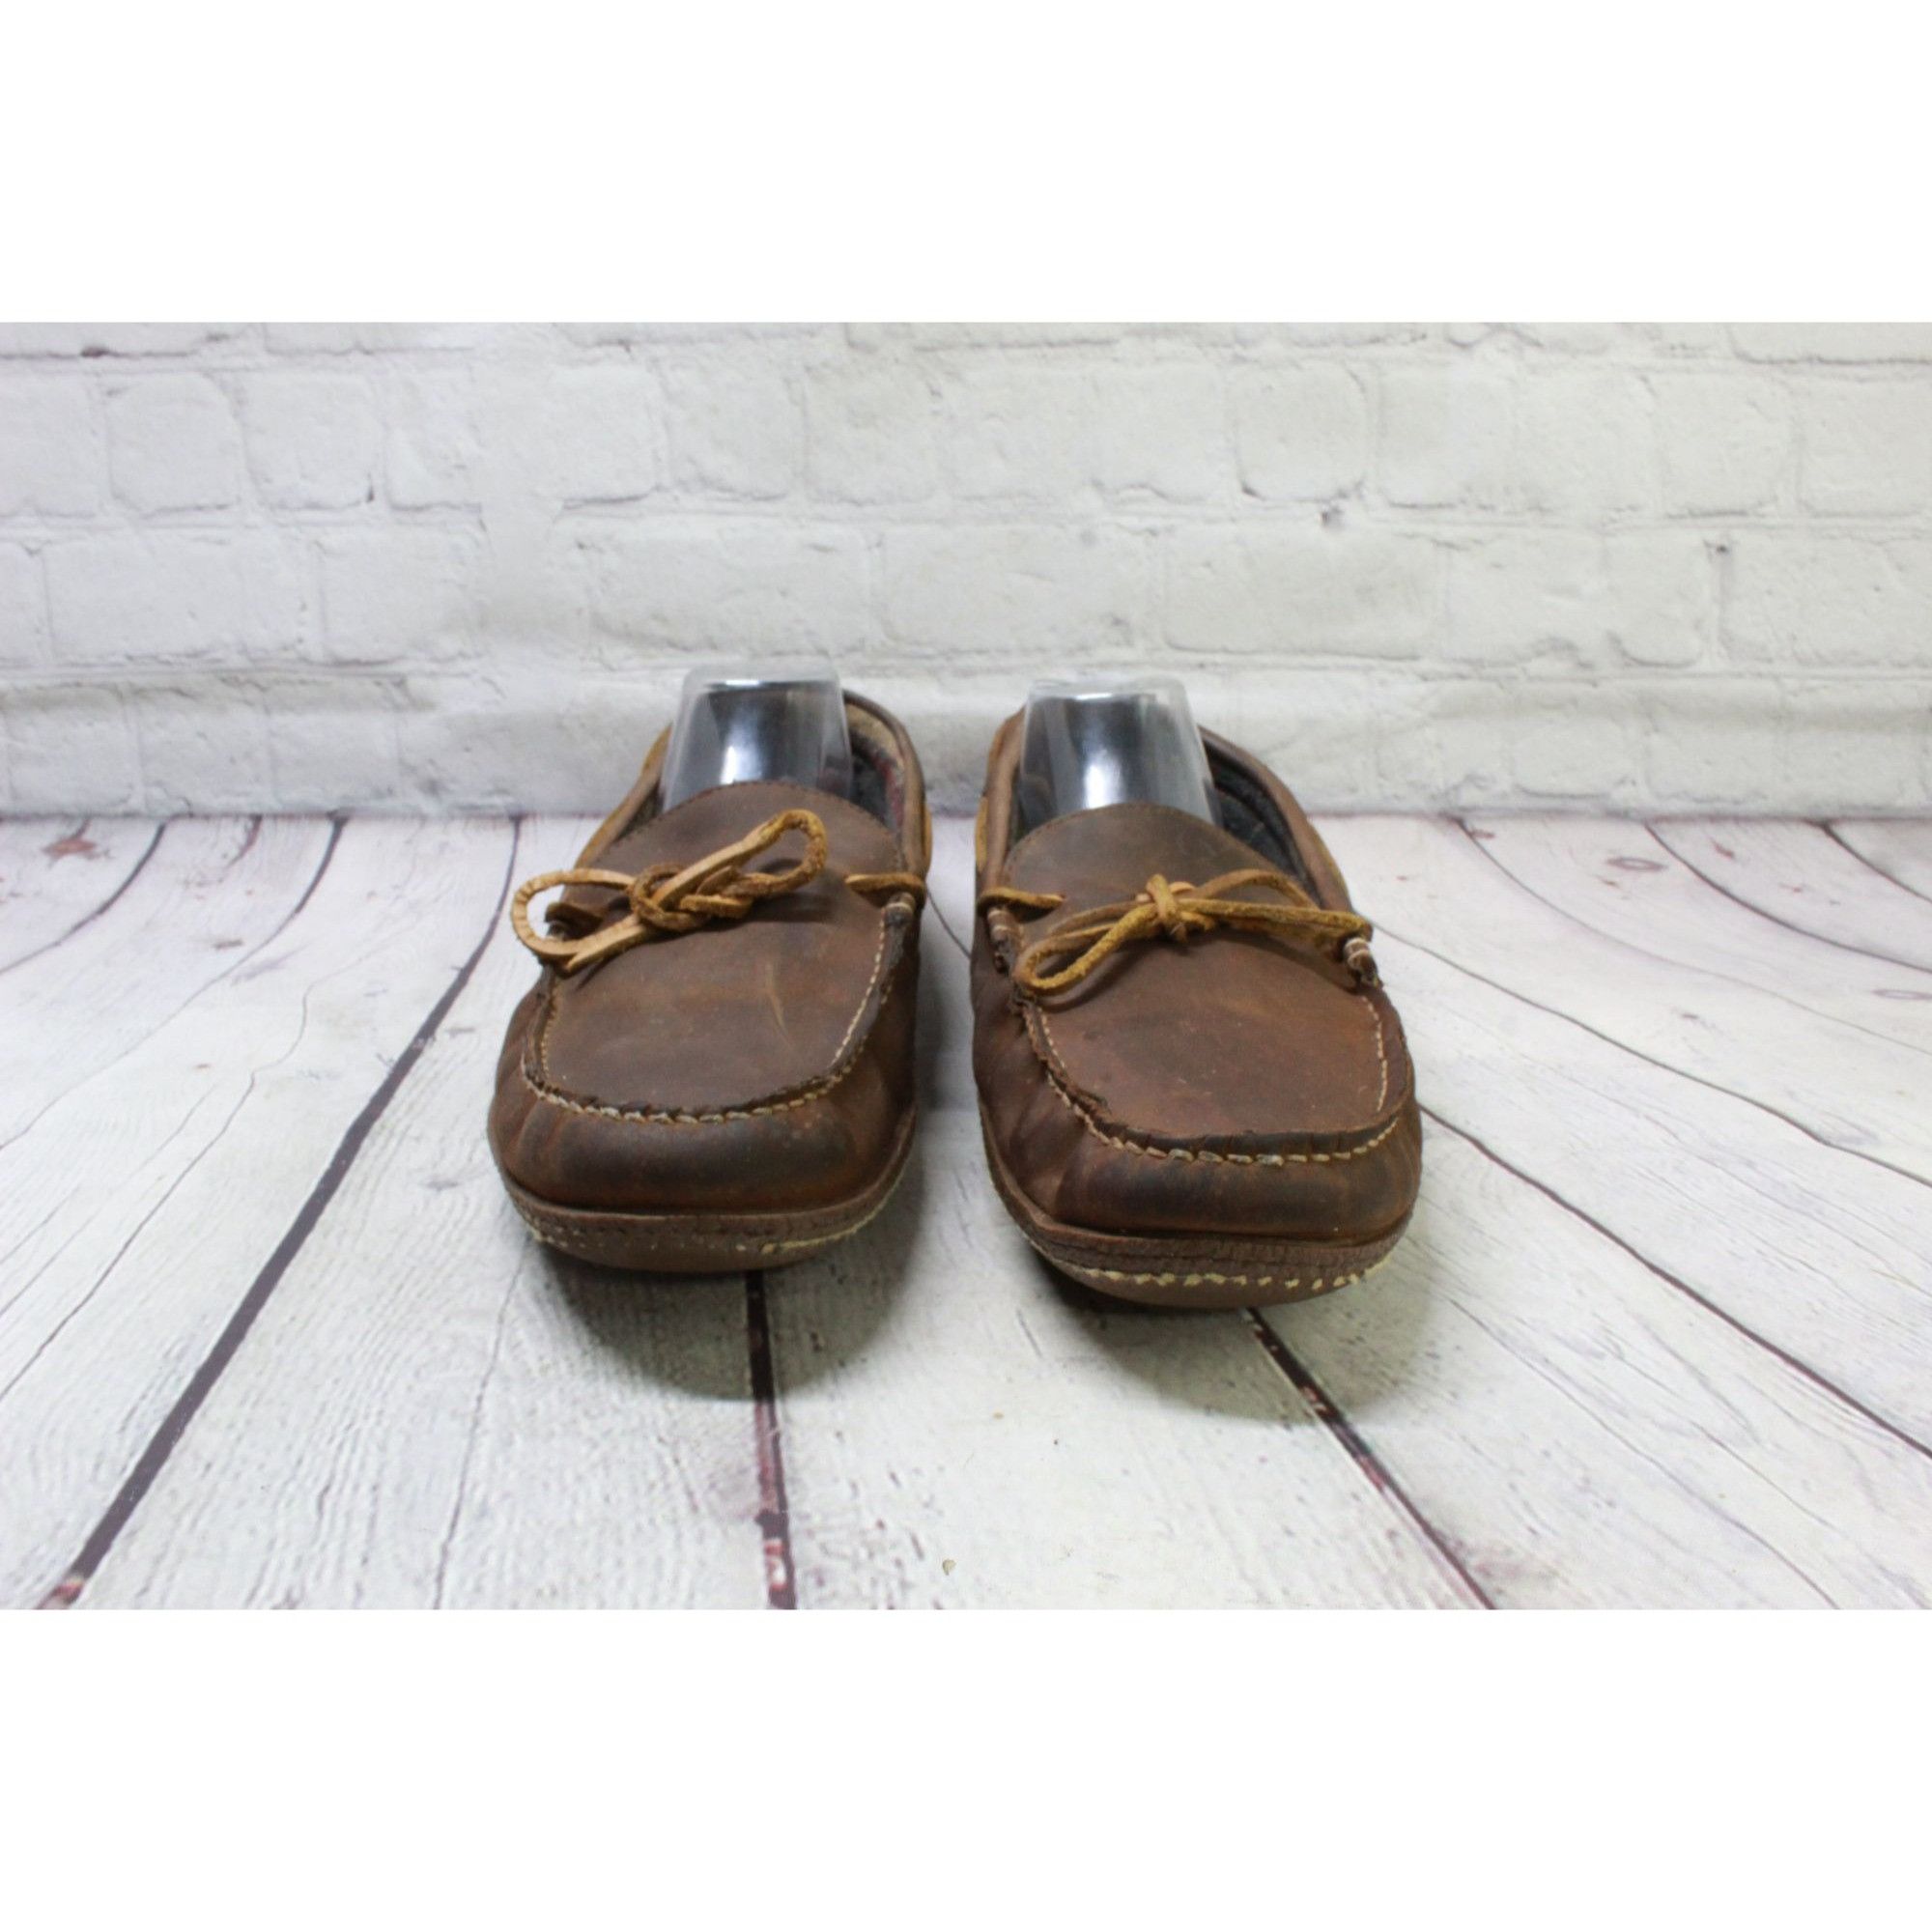 L.L. Bean LL Bean Men's Brown Leather Flannel-Lined Handsewn Slippers Size US 12 / EU 45 - 5 Thumbnail